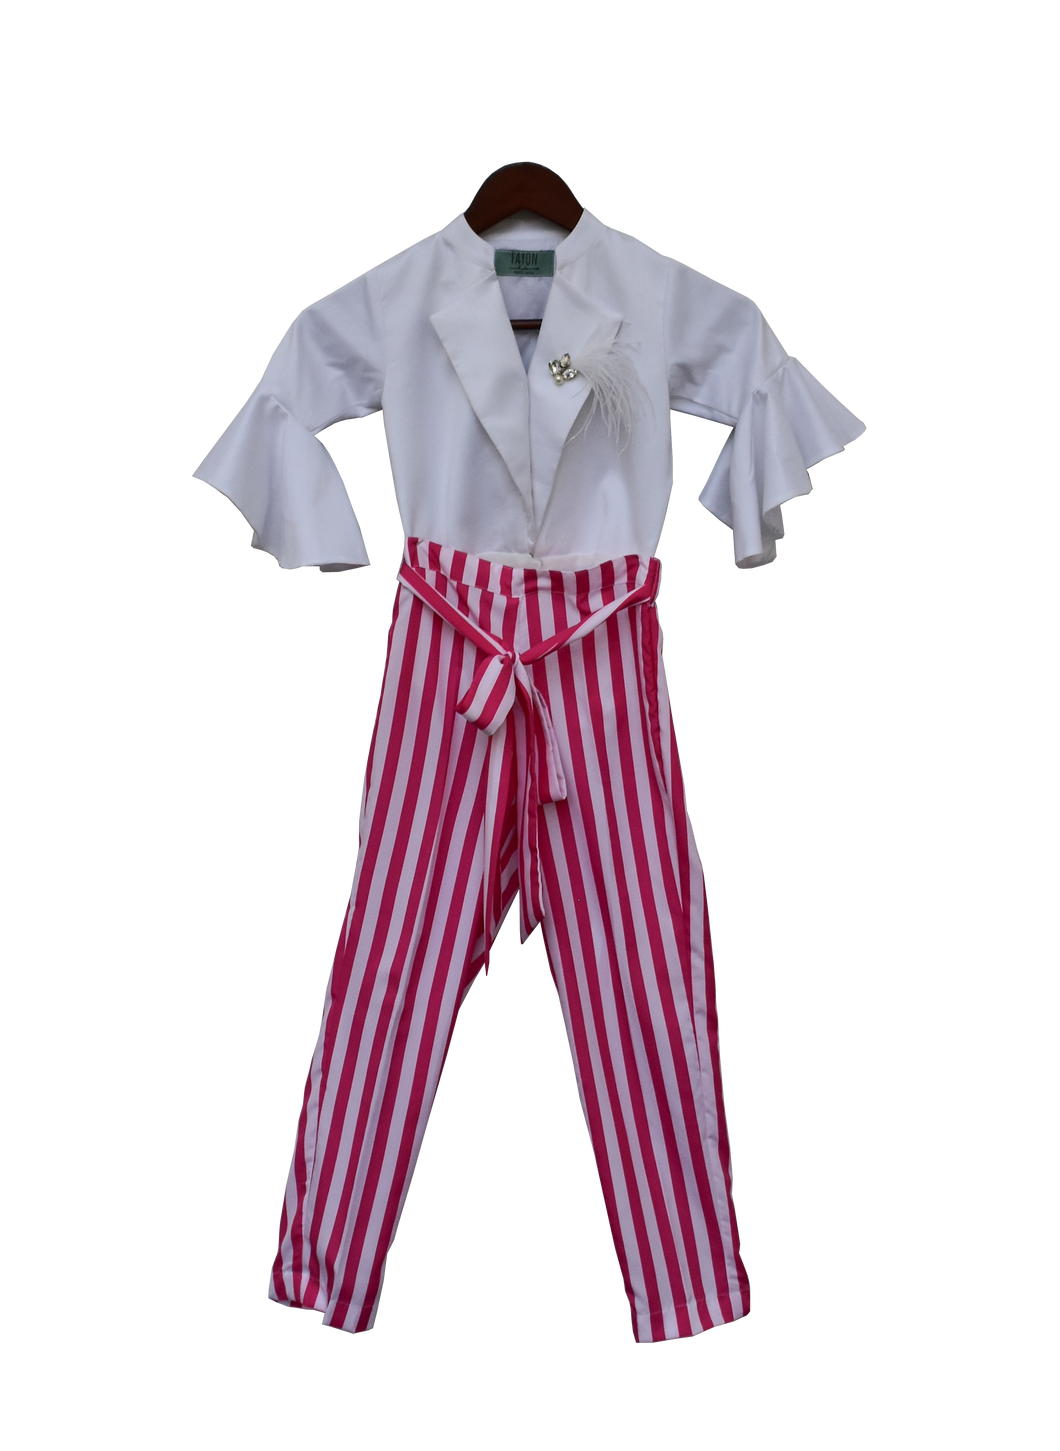 Girls White Knotted Top With Stripe Pants